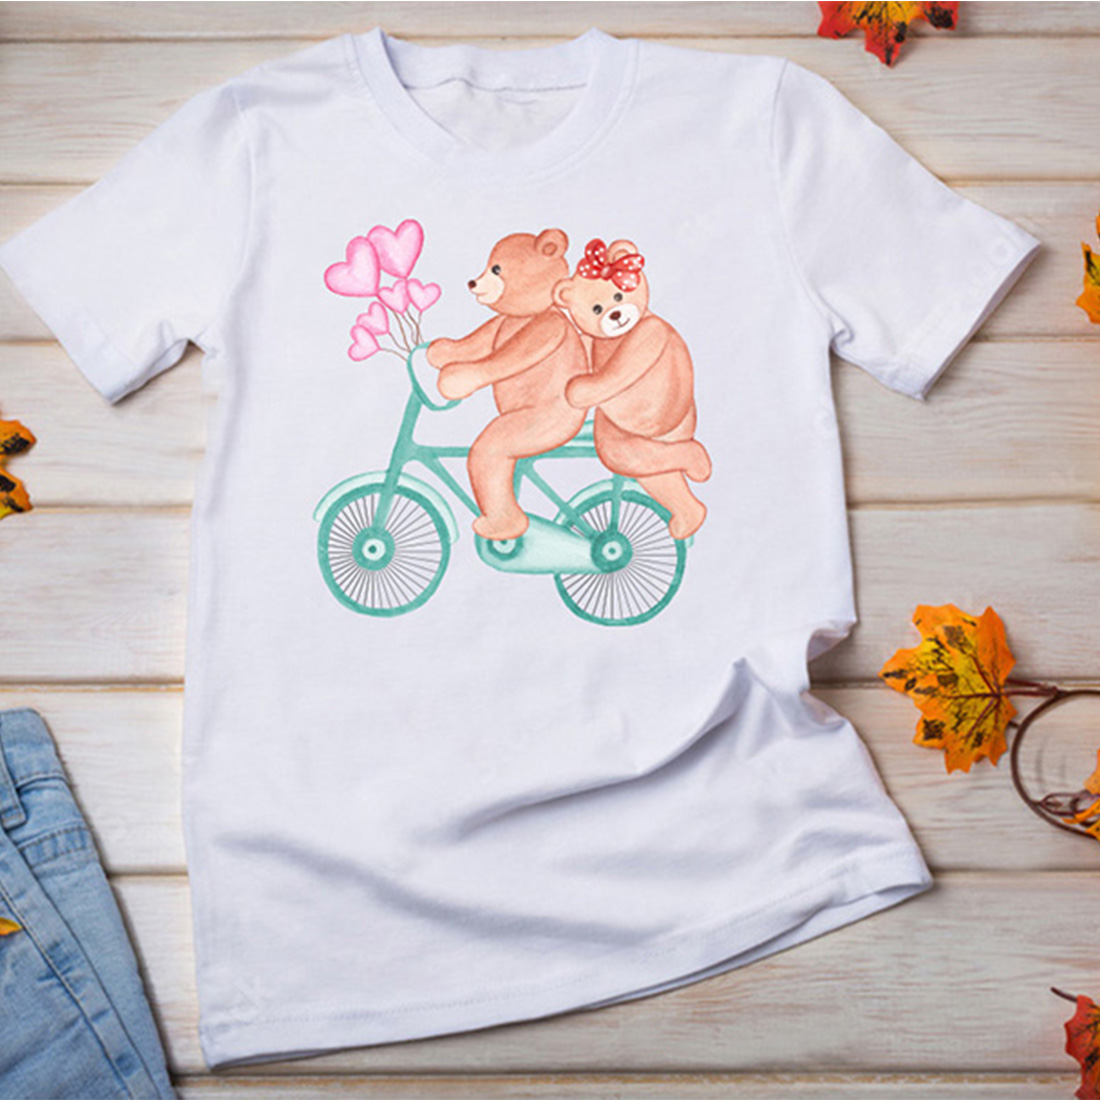 Image of t-shirt with adorable bear couple print